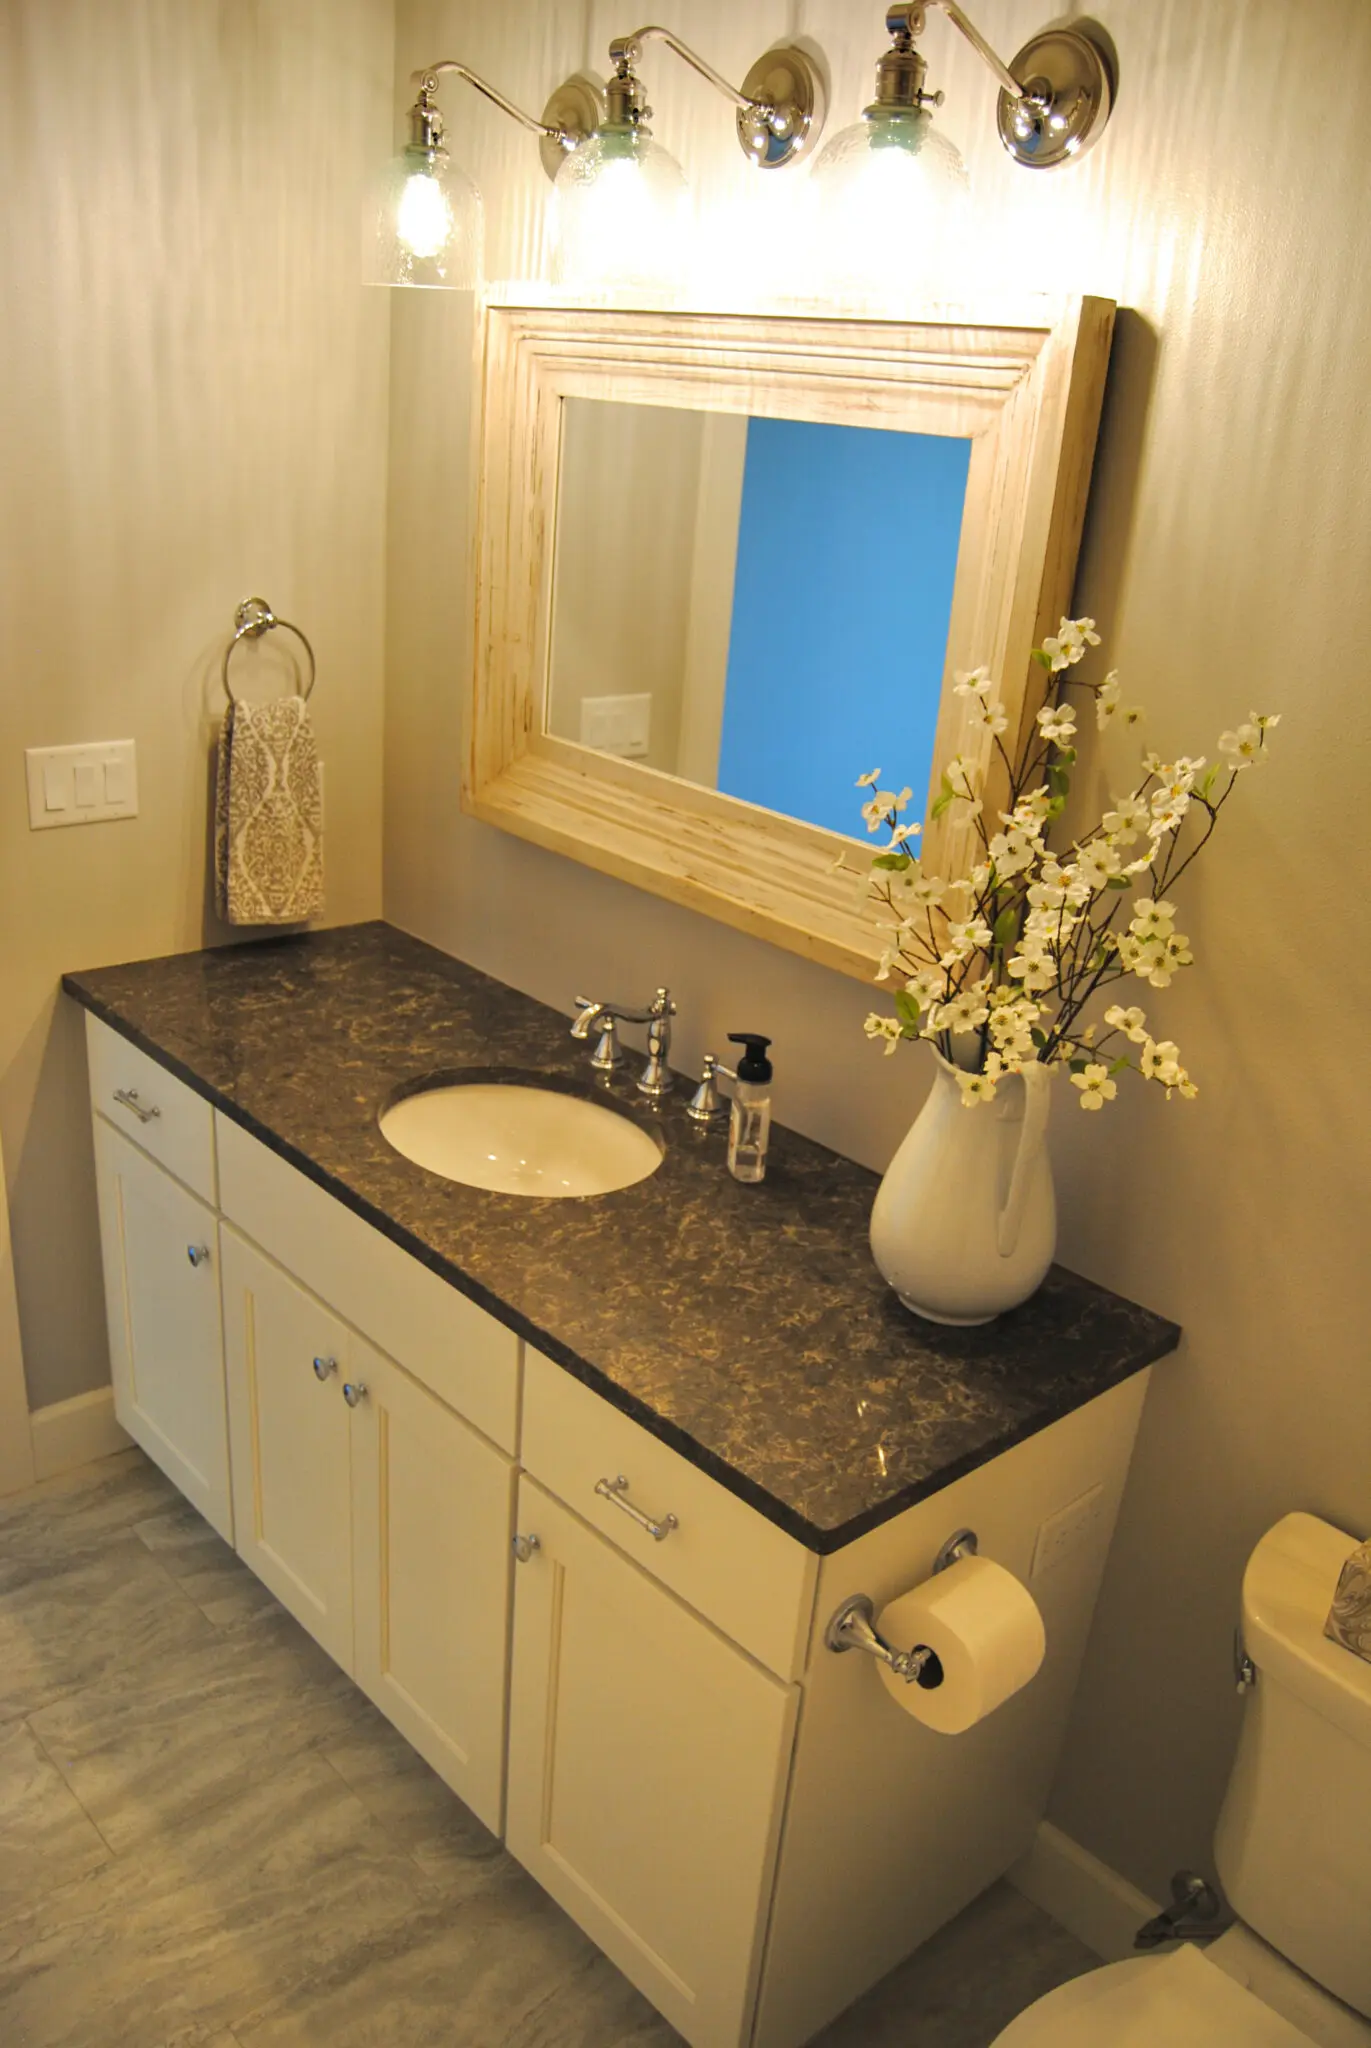 Modern bathroom renovation with framed mirror and cabinets